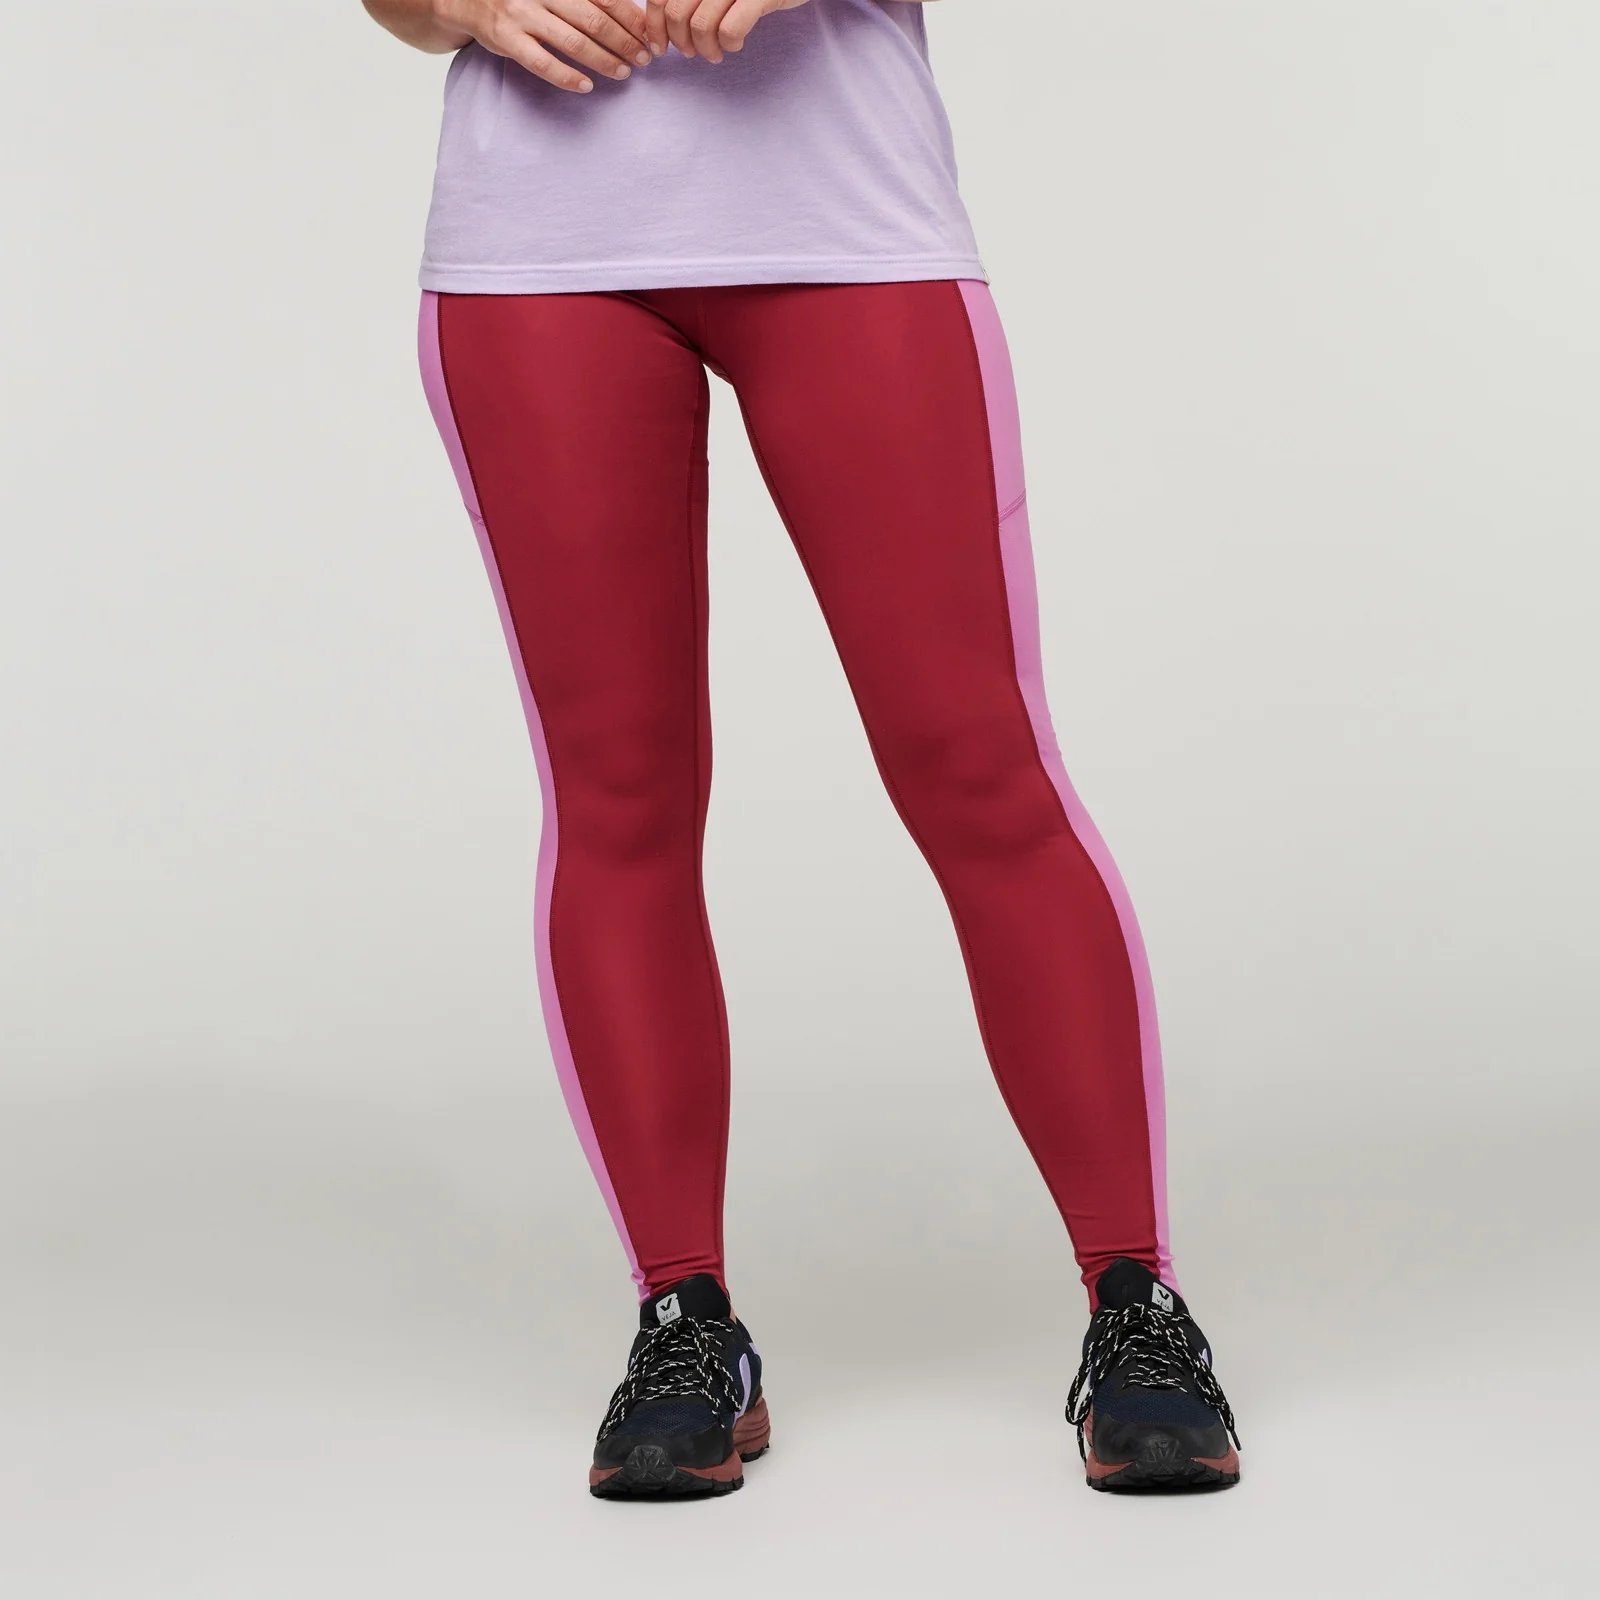 Cotopaxi Tight Roso Travel Raspberry Outdoorhose